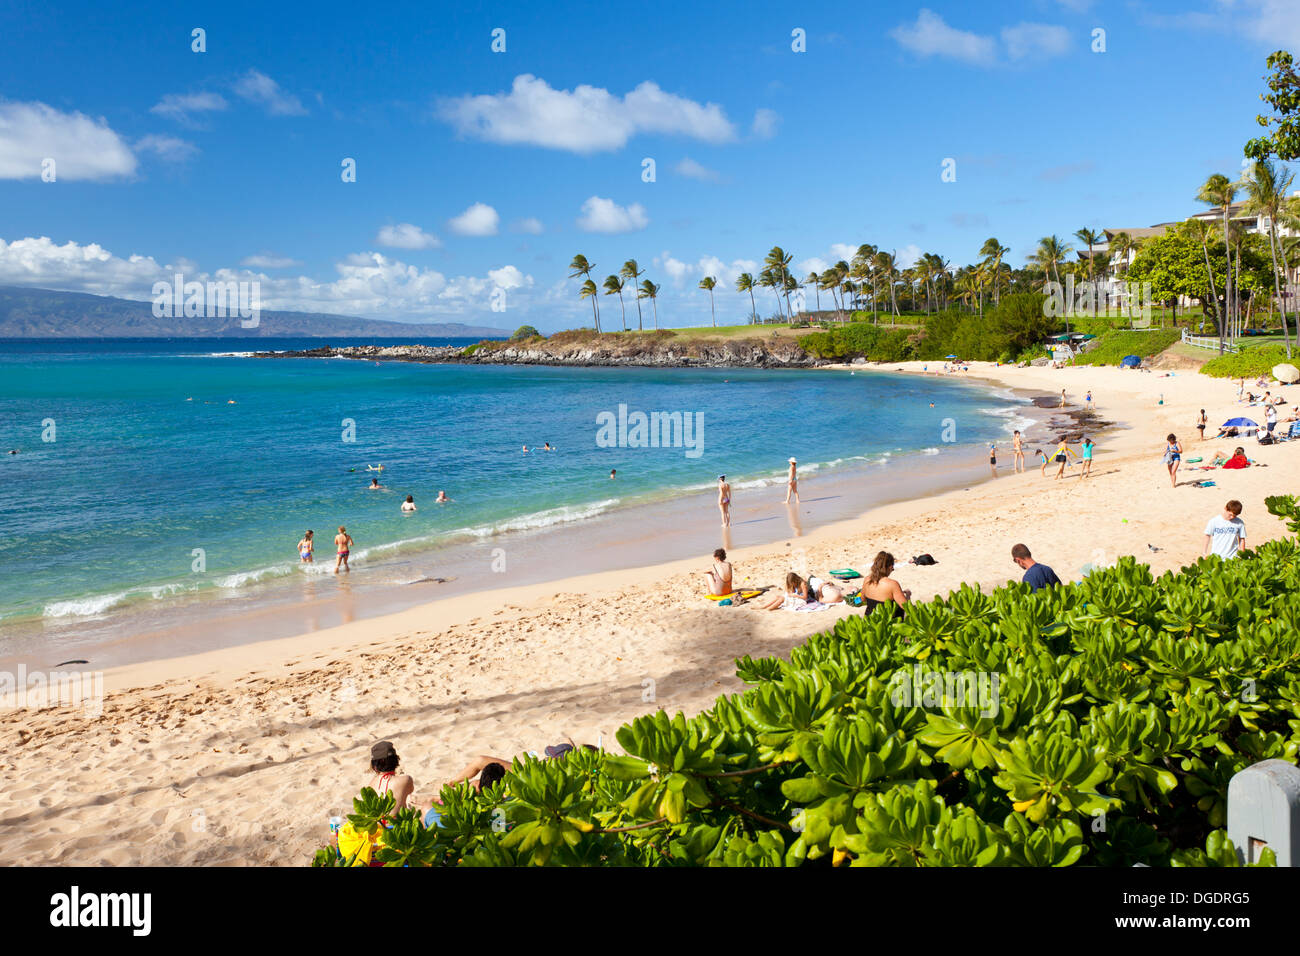 Lahaina Beach with some palm trees and people in Maui, Hawaii. Molokai in the background. Stock Photo